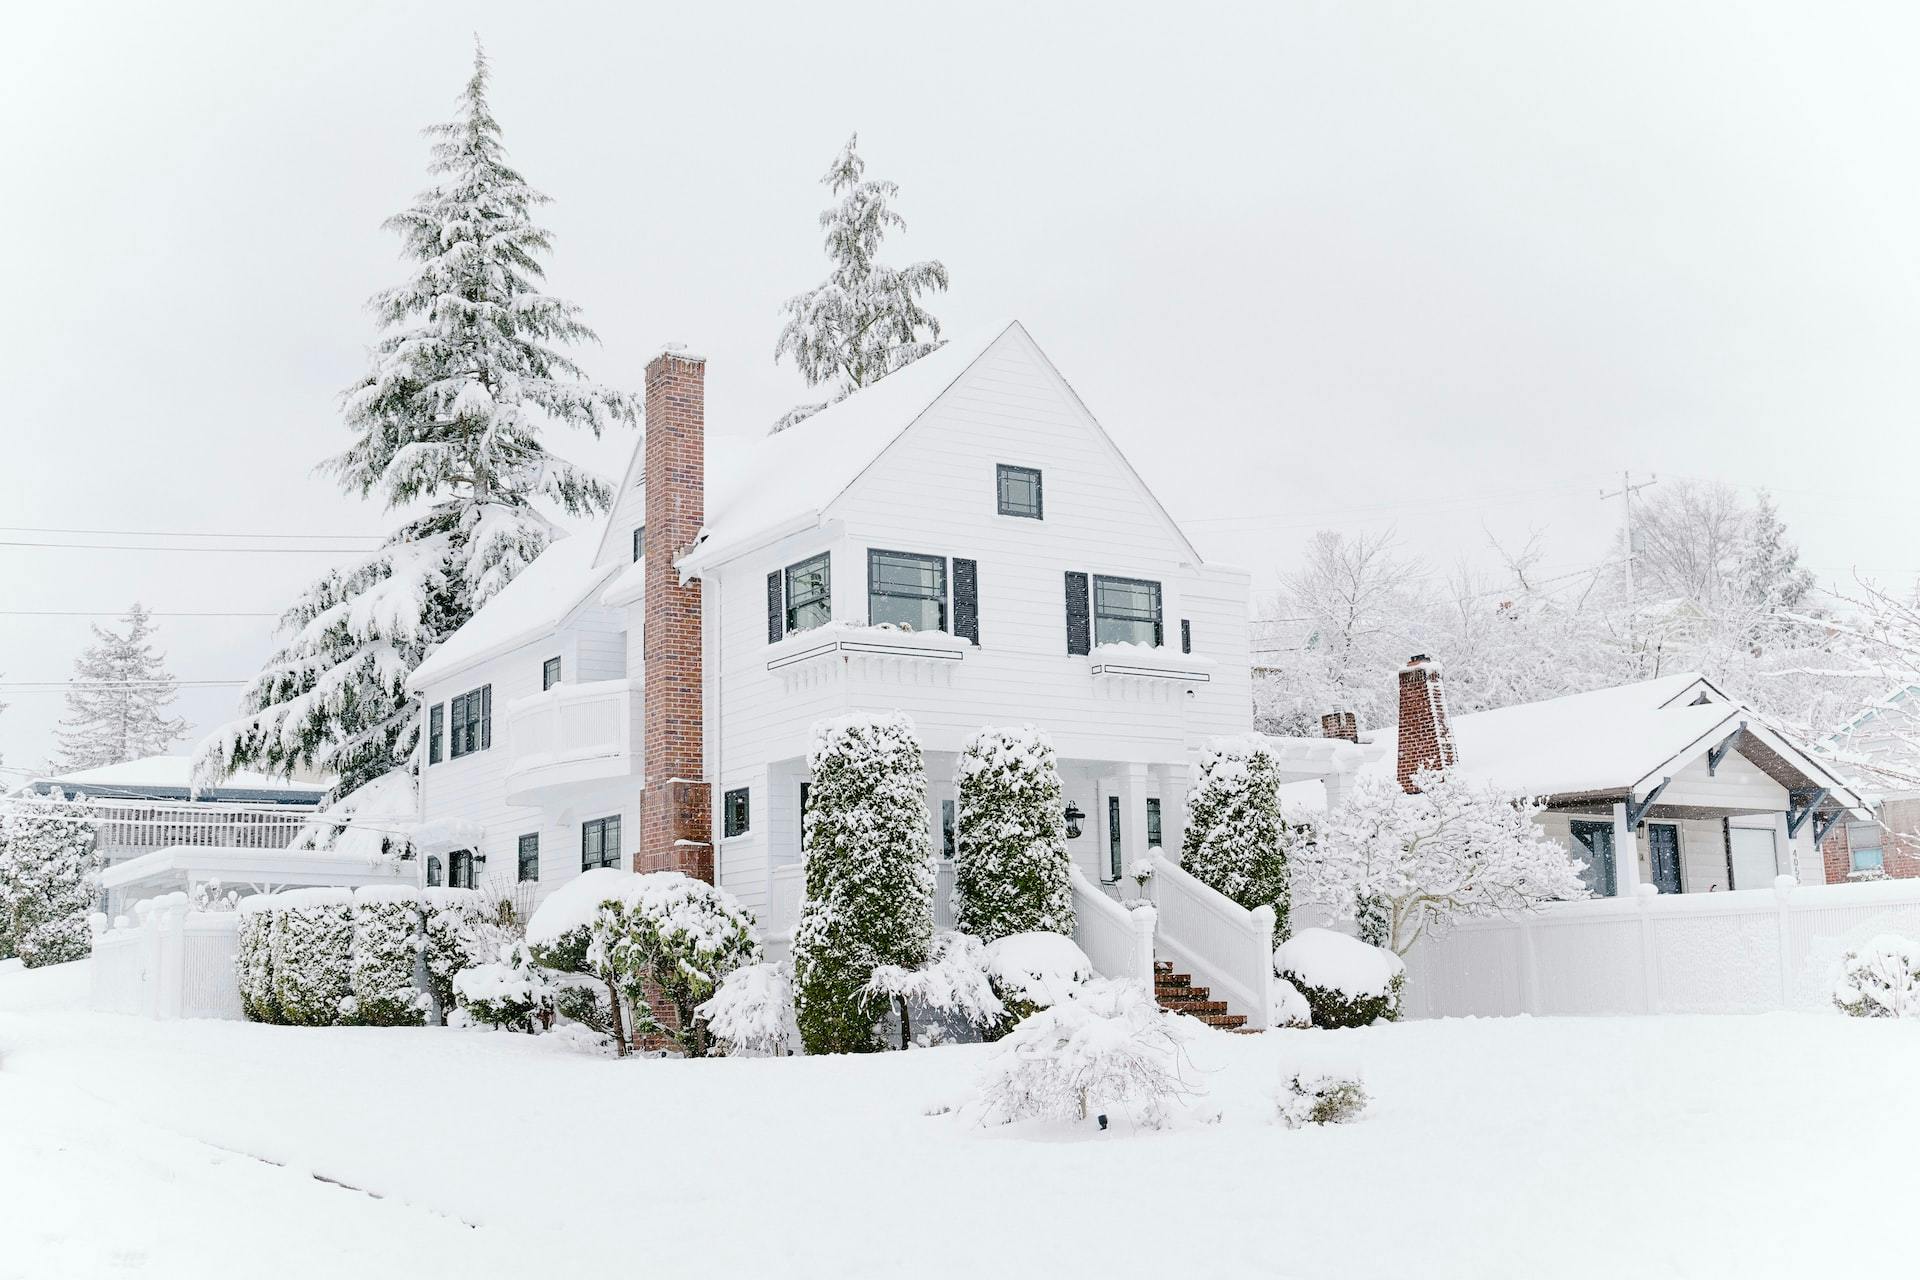 7 Tips to Prepare Your Home’s Exterior for the Winter